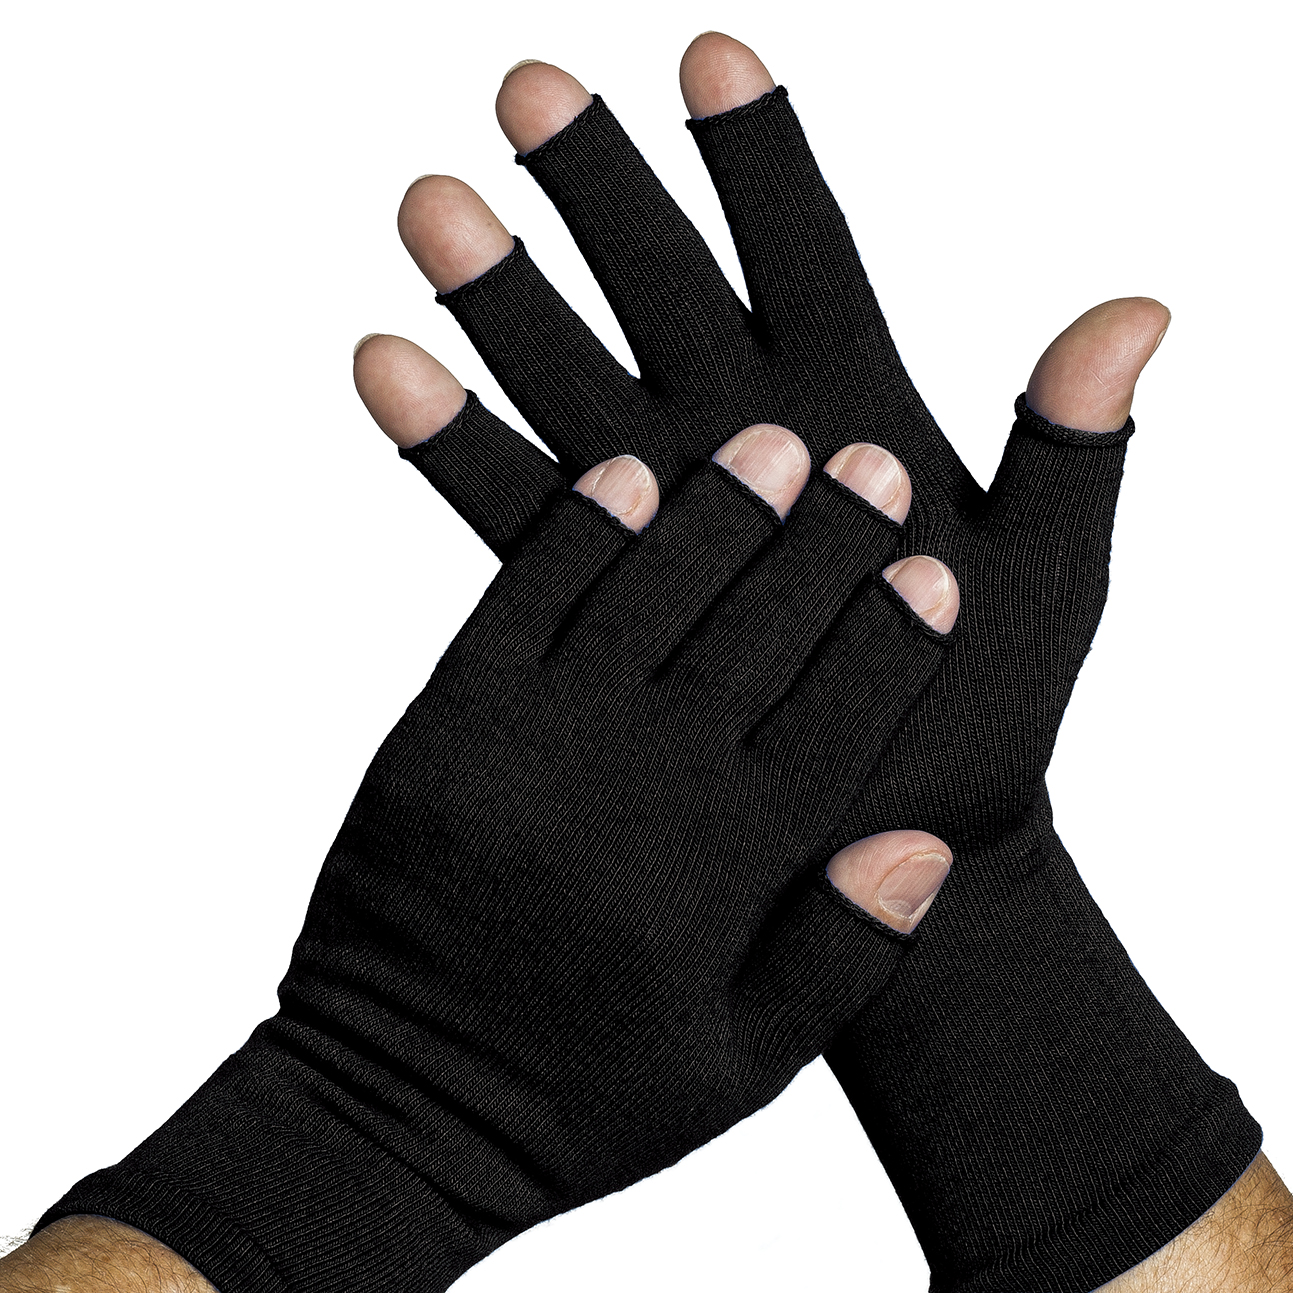 Details about   Unisex Hand Protector Gloves Wrist Accessories Trend Warm Cloth Full Finger HO3 